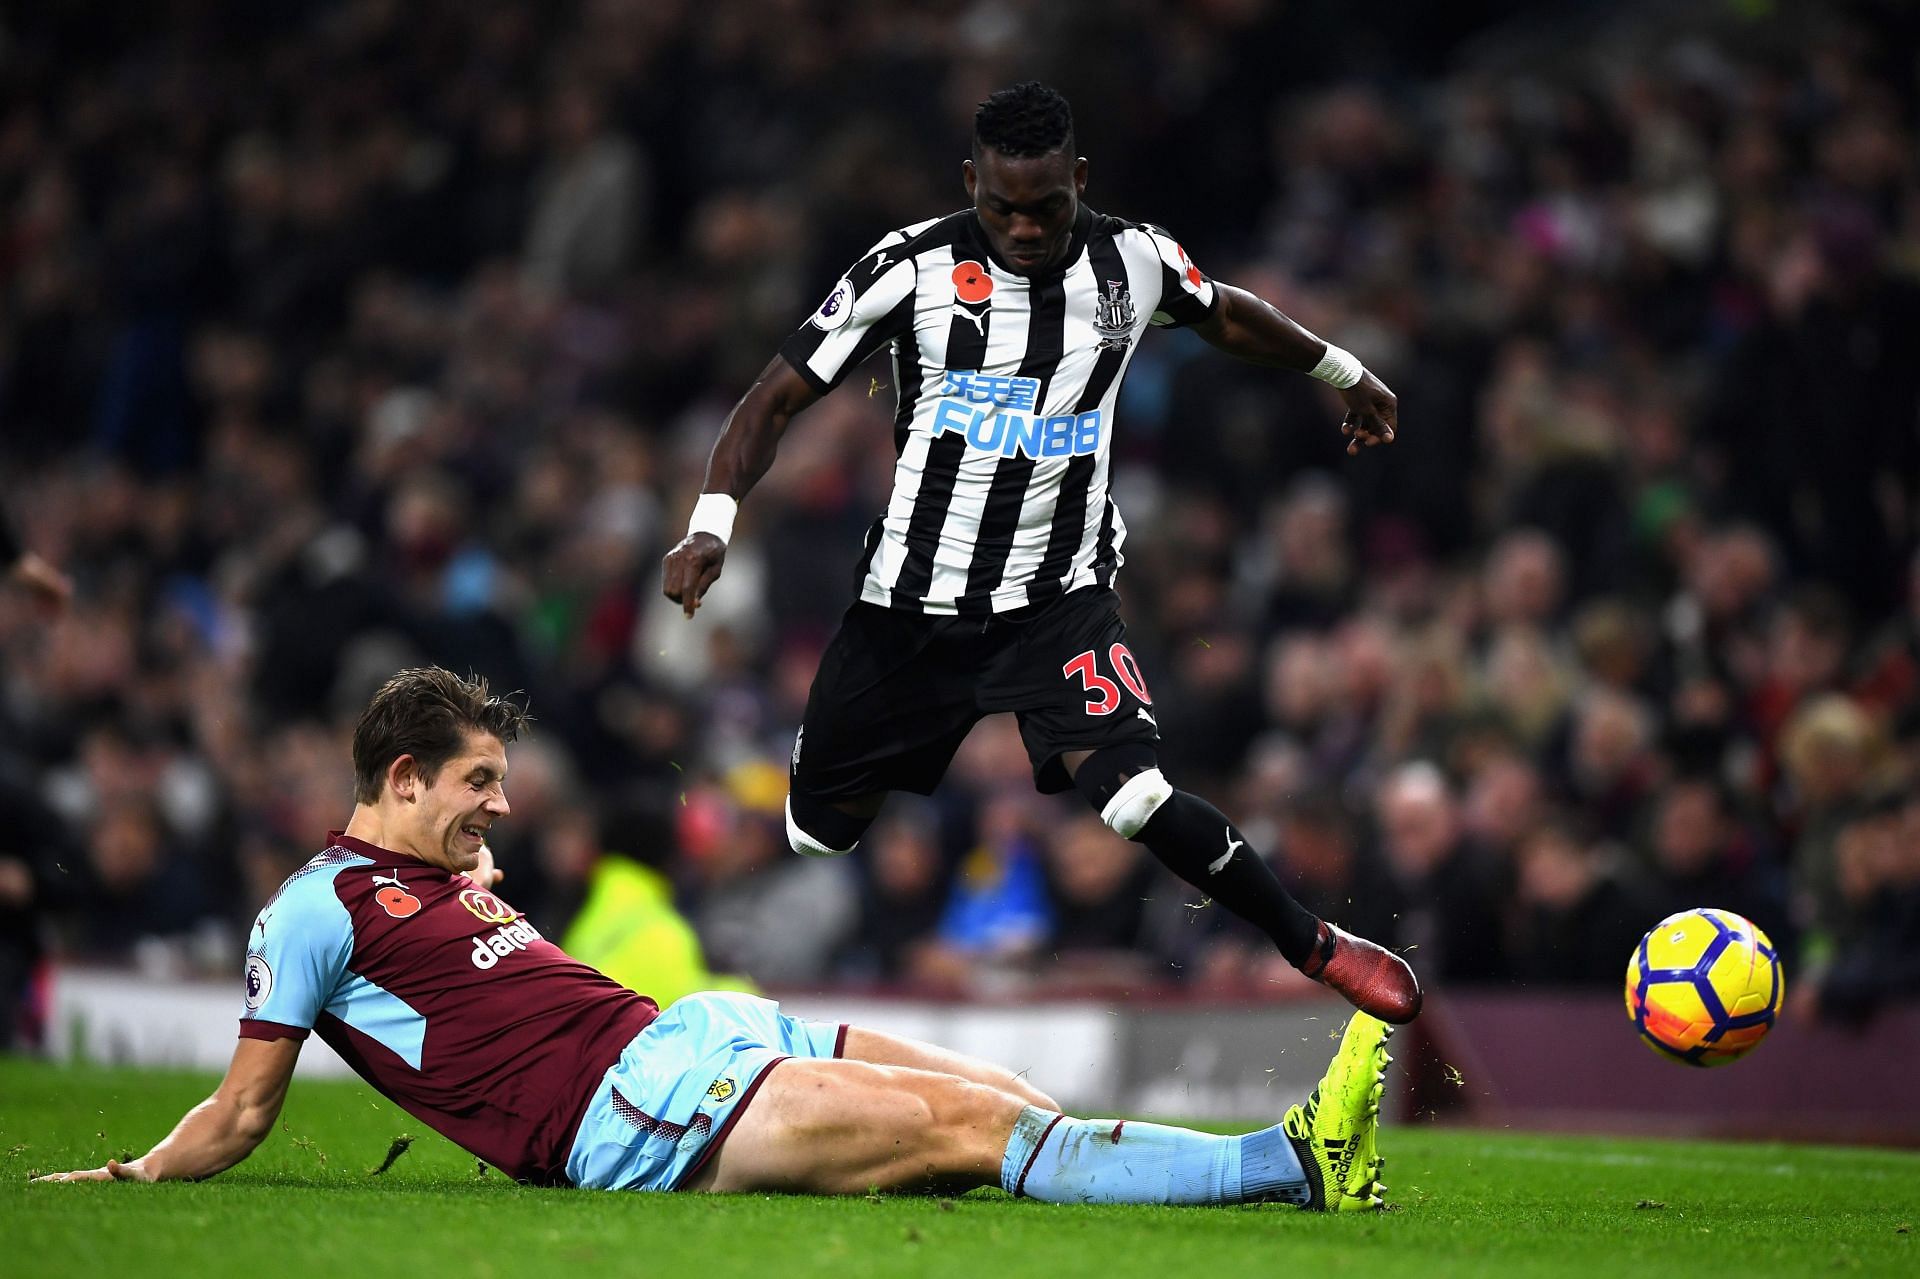 James Tarkowski with a strong tackle against Newcastle United